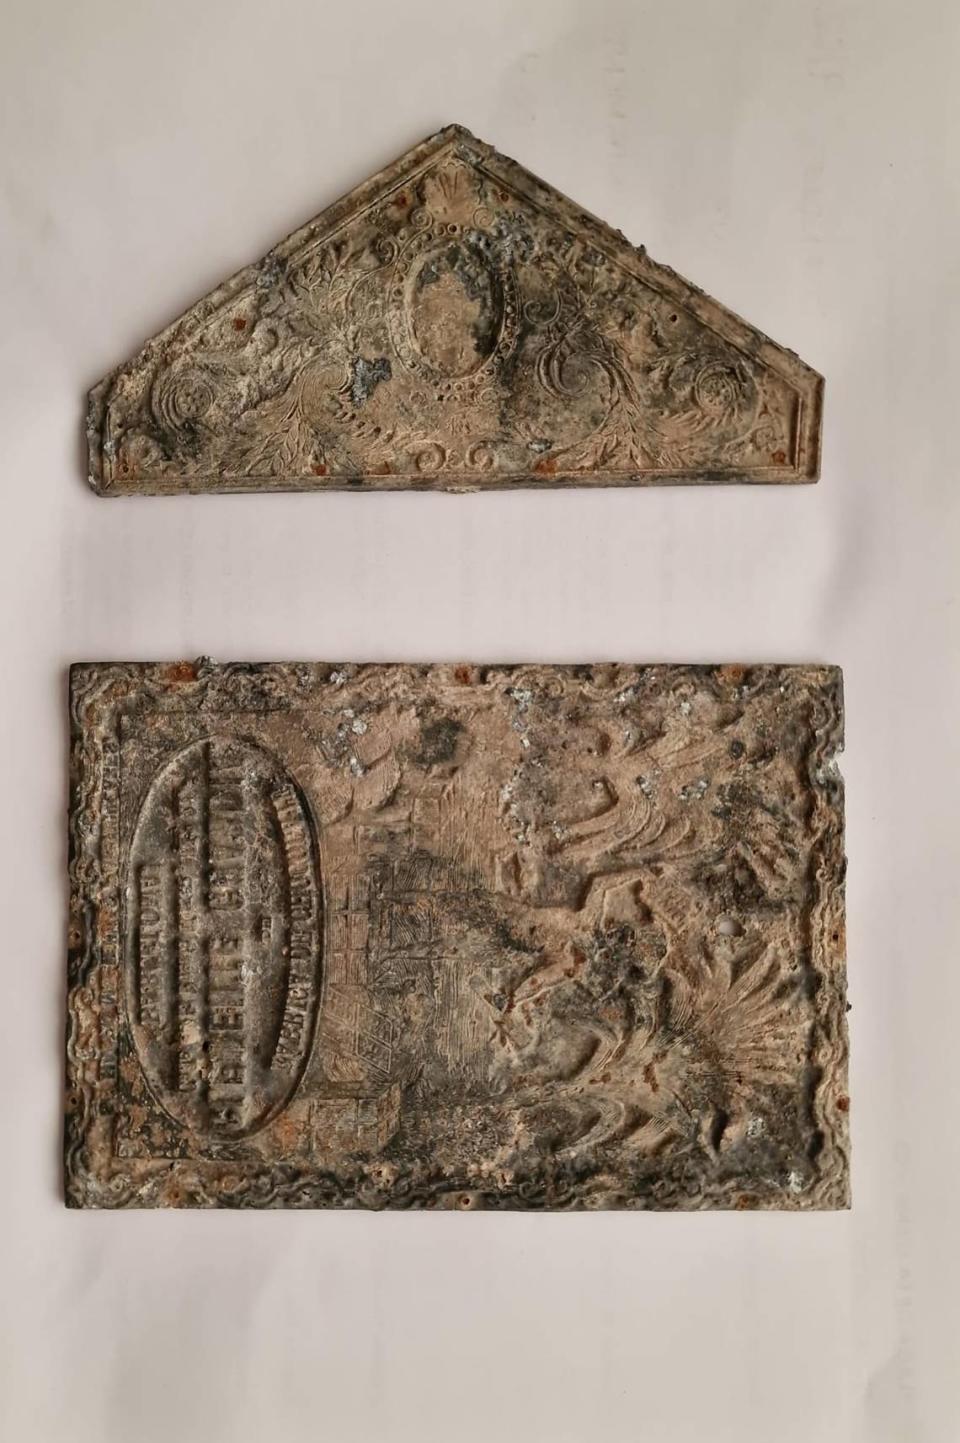 The lead panels were used to label the chocolate made in the factory, archaeologists. Photo by Marta Lucas via Barcelona Archaeology Service